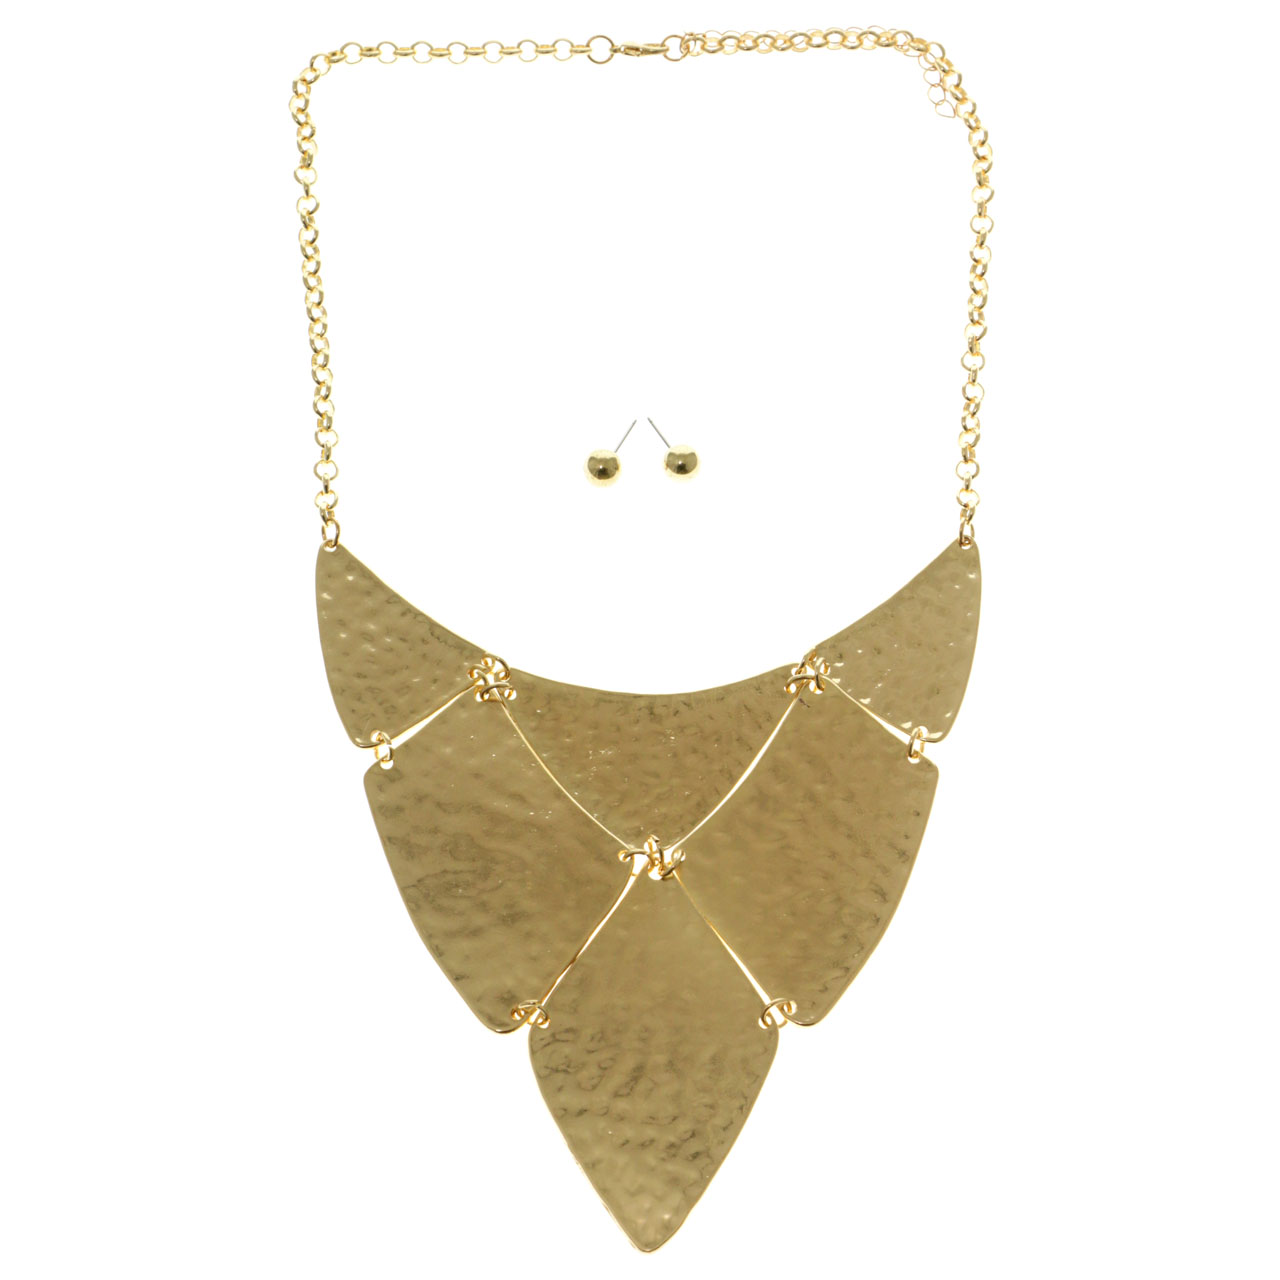 Mi Amore Gold-Tone Statement Necklace With Beaten Metal Bib Design; Includes Post Earrings TMN1004